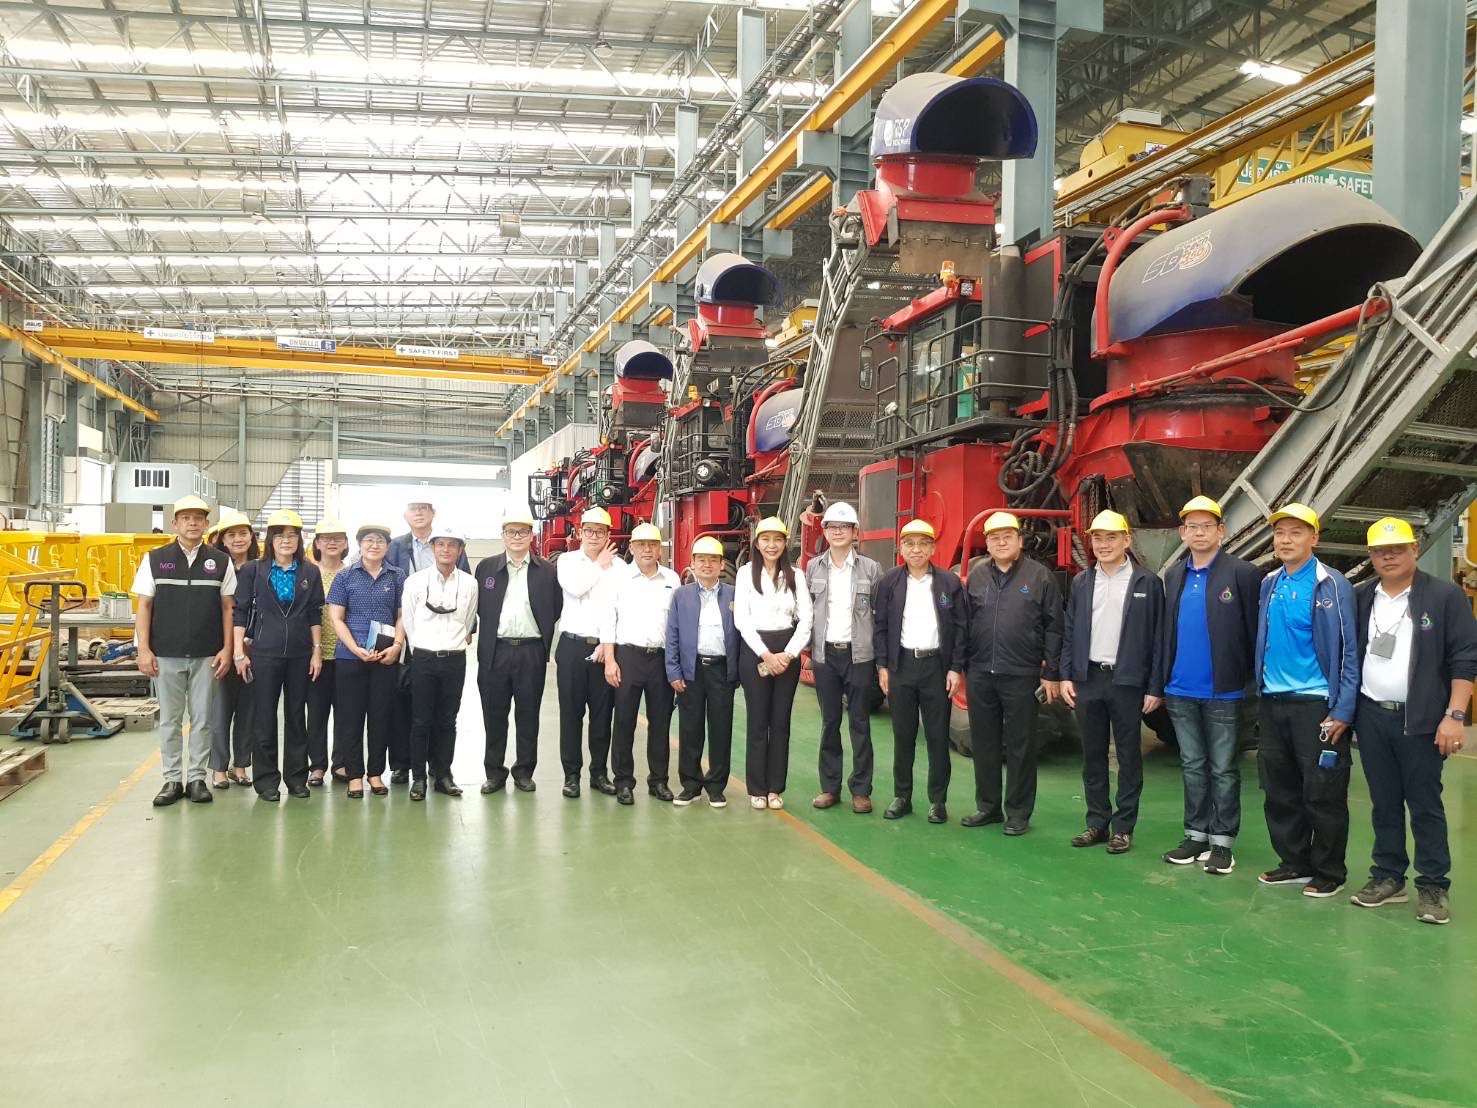 OIE Visits the Bioindustry Promotion Center Building and the Agricultural Machinery Production Process at Tang Sia Ping Metal Works Co., Ltd., in Chon Buri